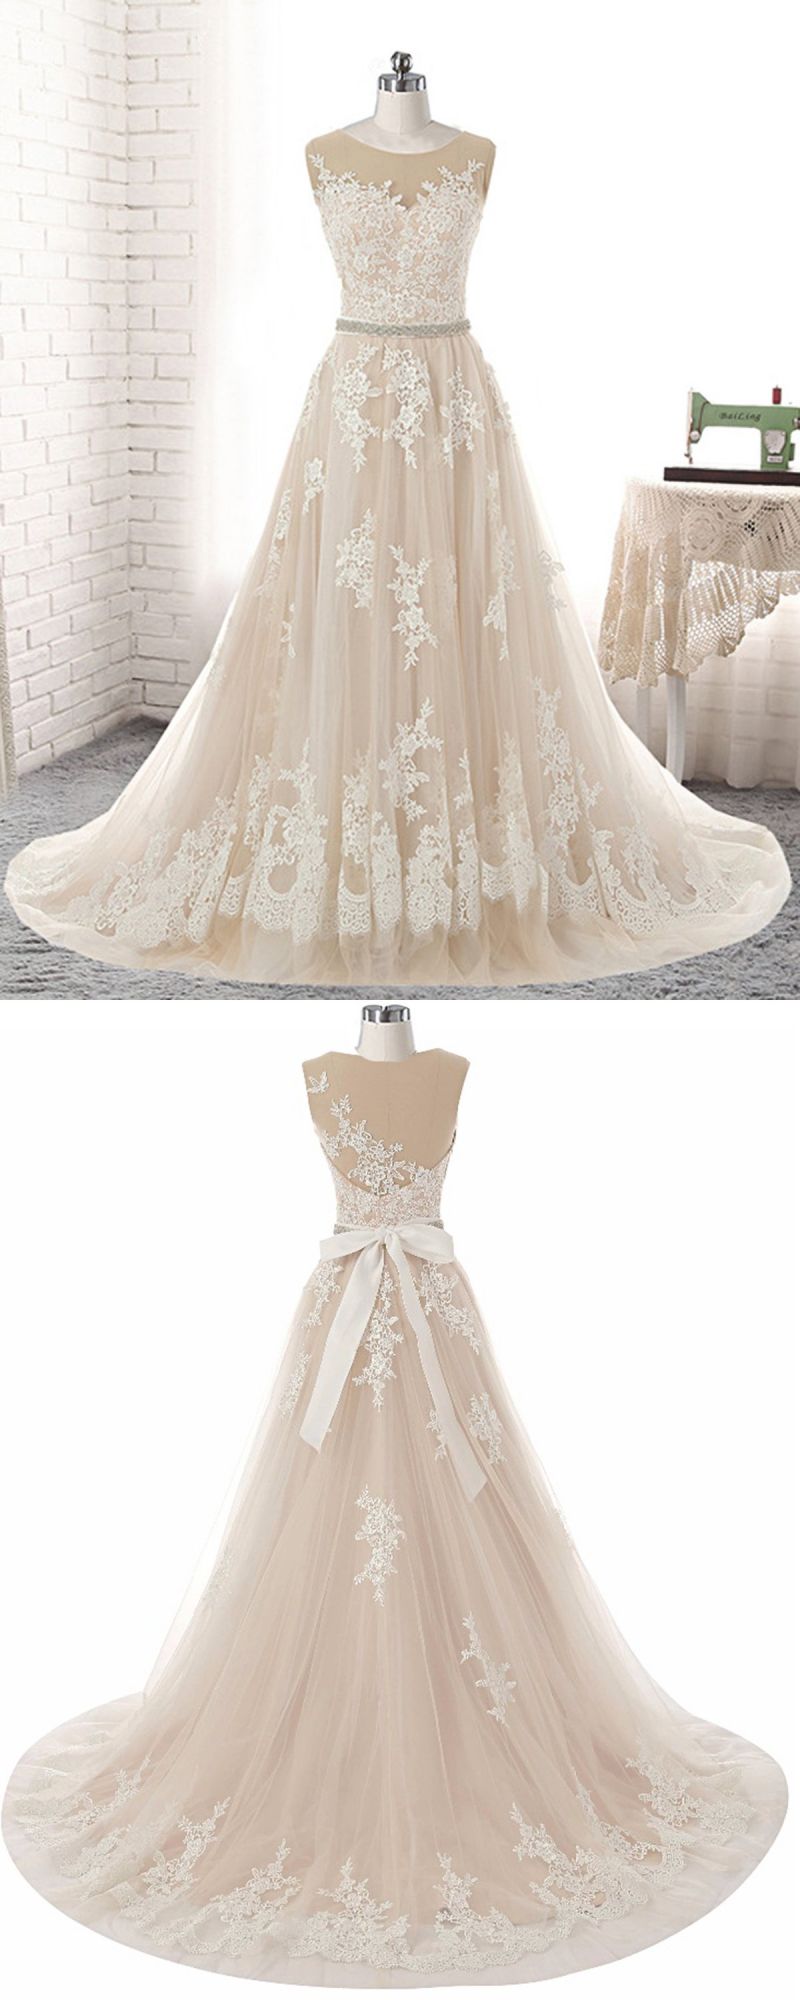 Glamorous Creamy Tulle Round Neck Long Wedding Dress White Lace Applique Bridal Gowns On Sale